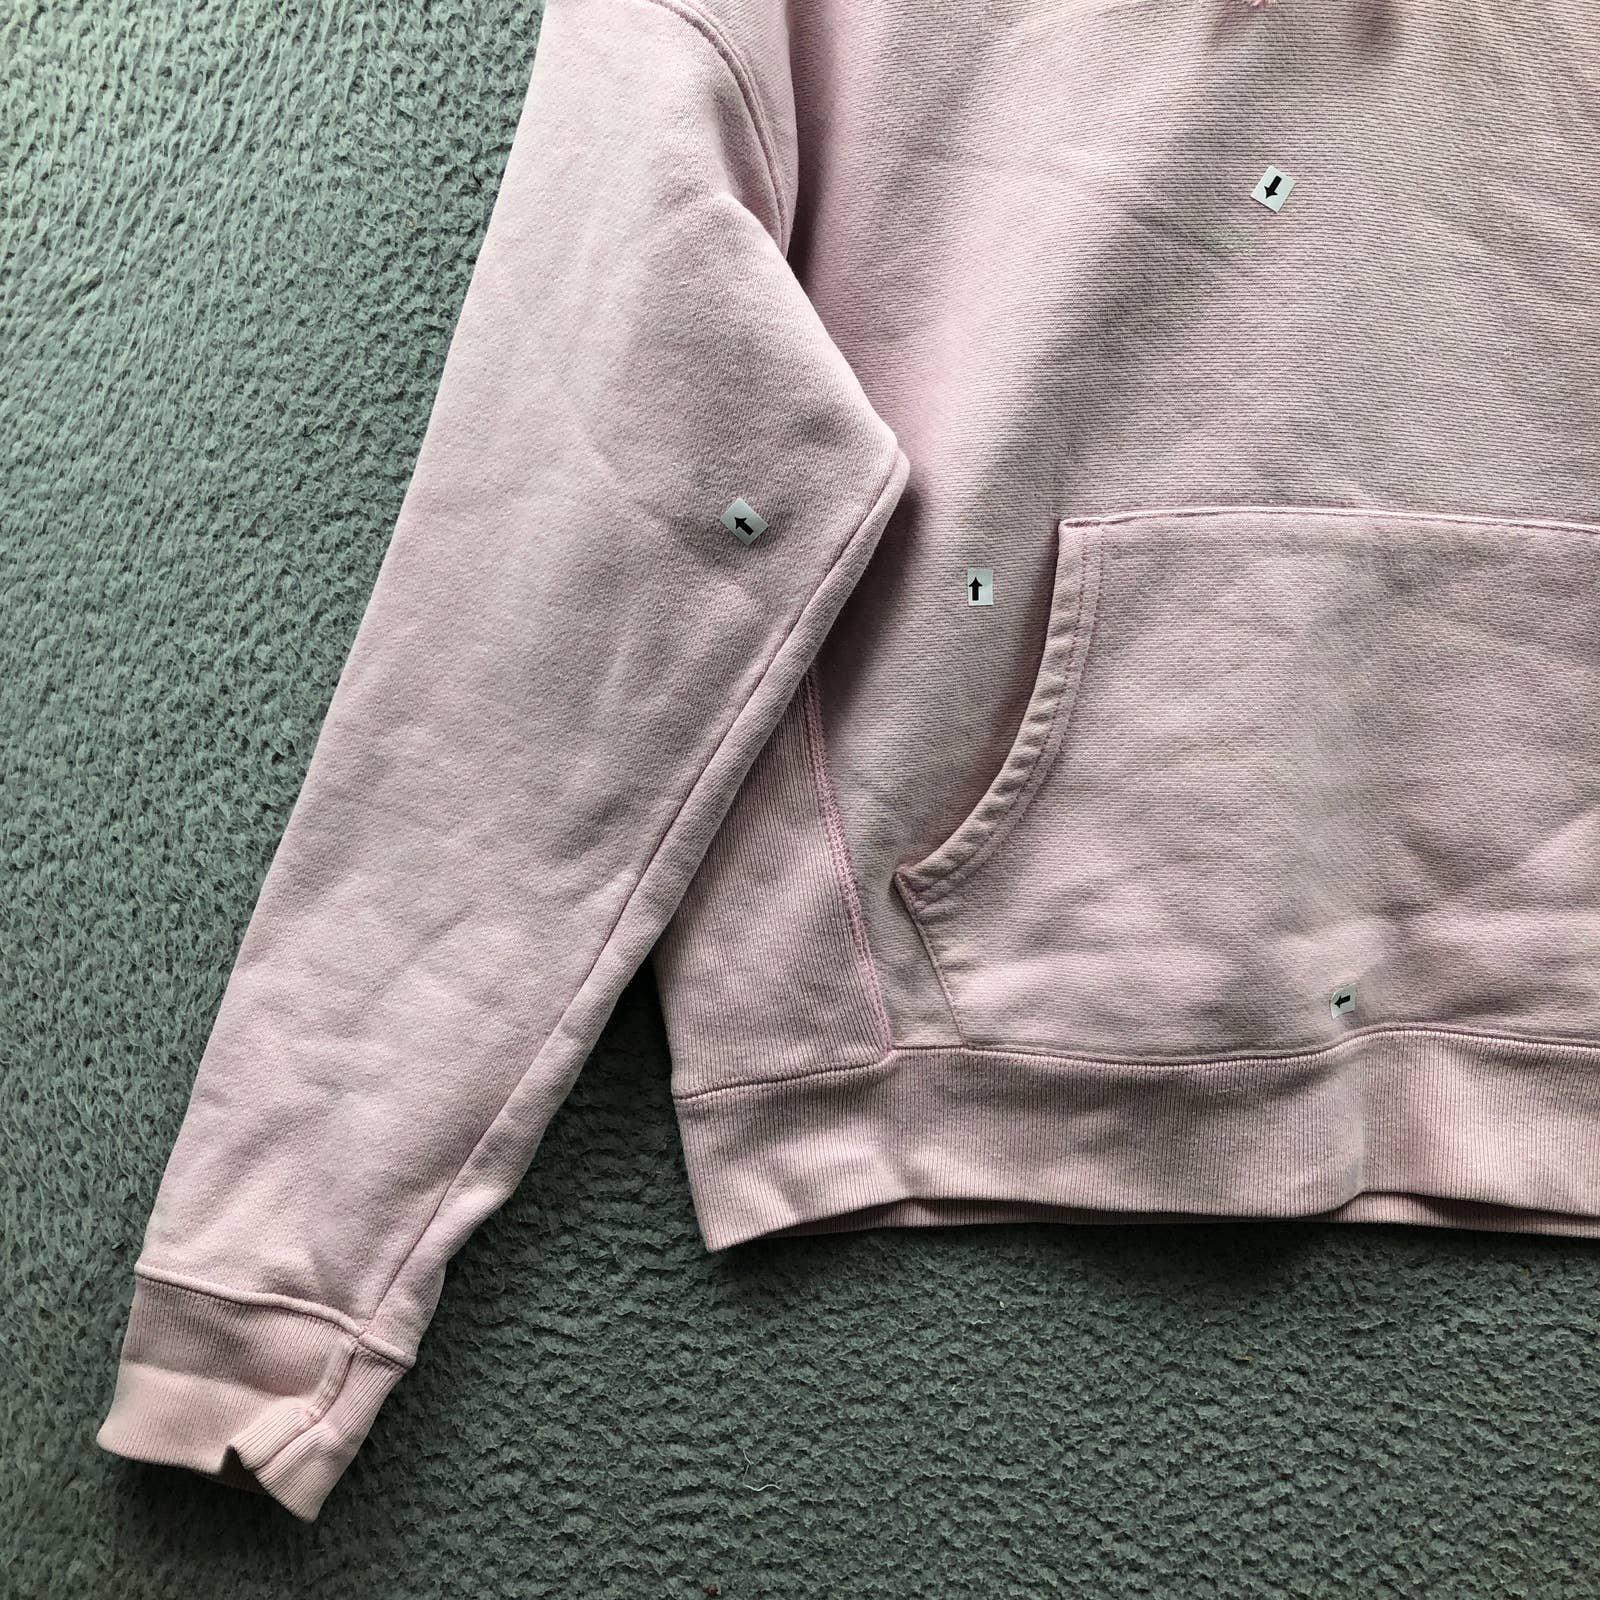 cheapest place to buy  Champion Reverse Weave Sweatshirt Hoodie Women´s Large L Embroidered Logo Pink gyTGXqUR8 Wholesale